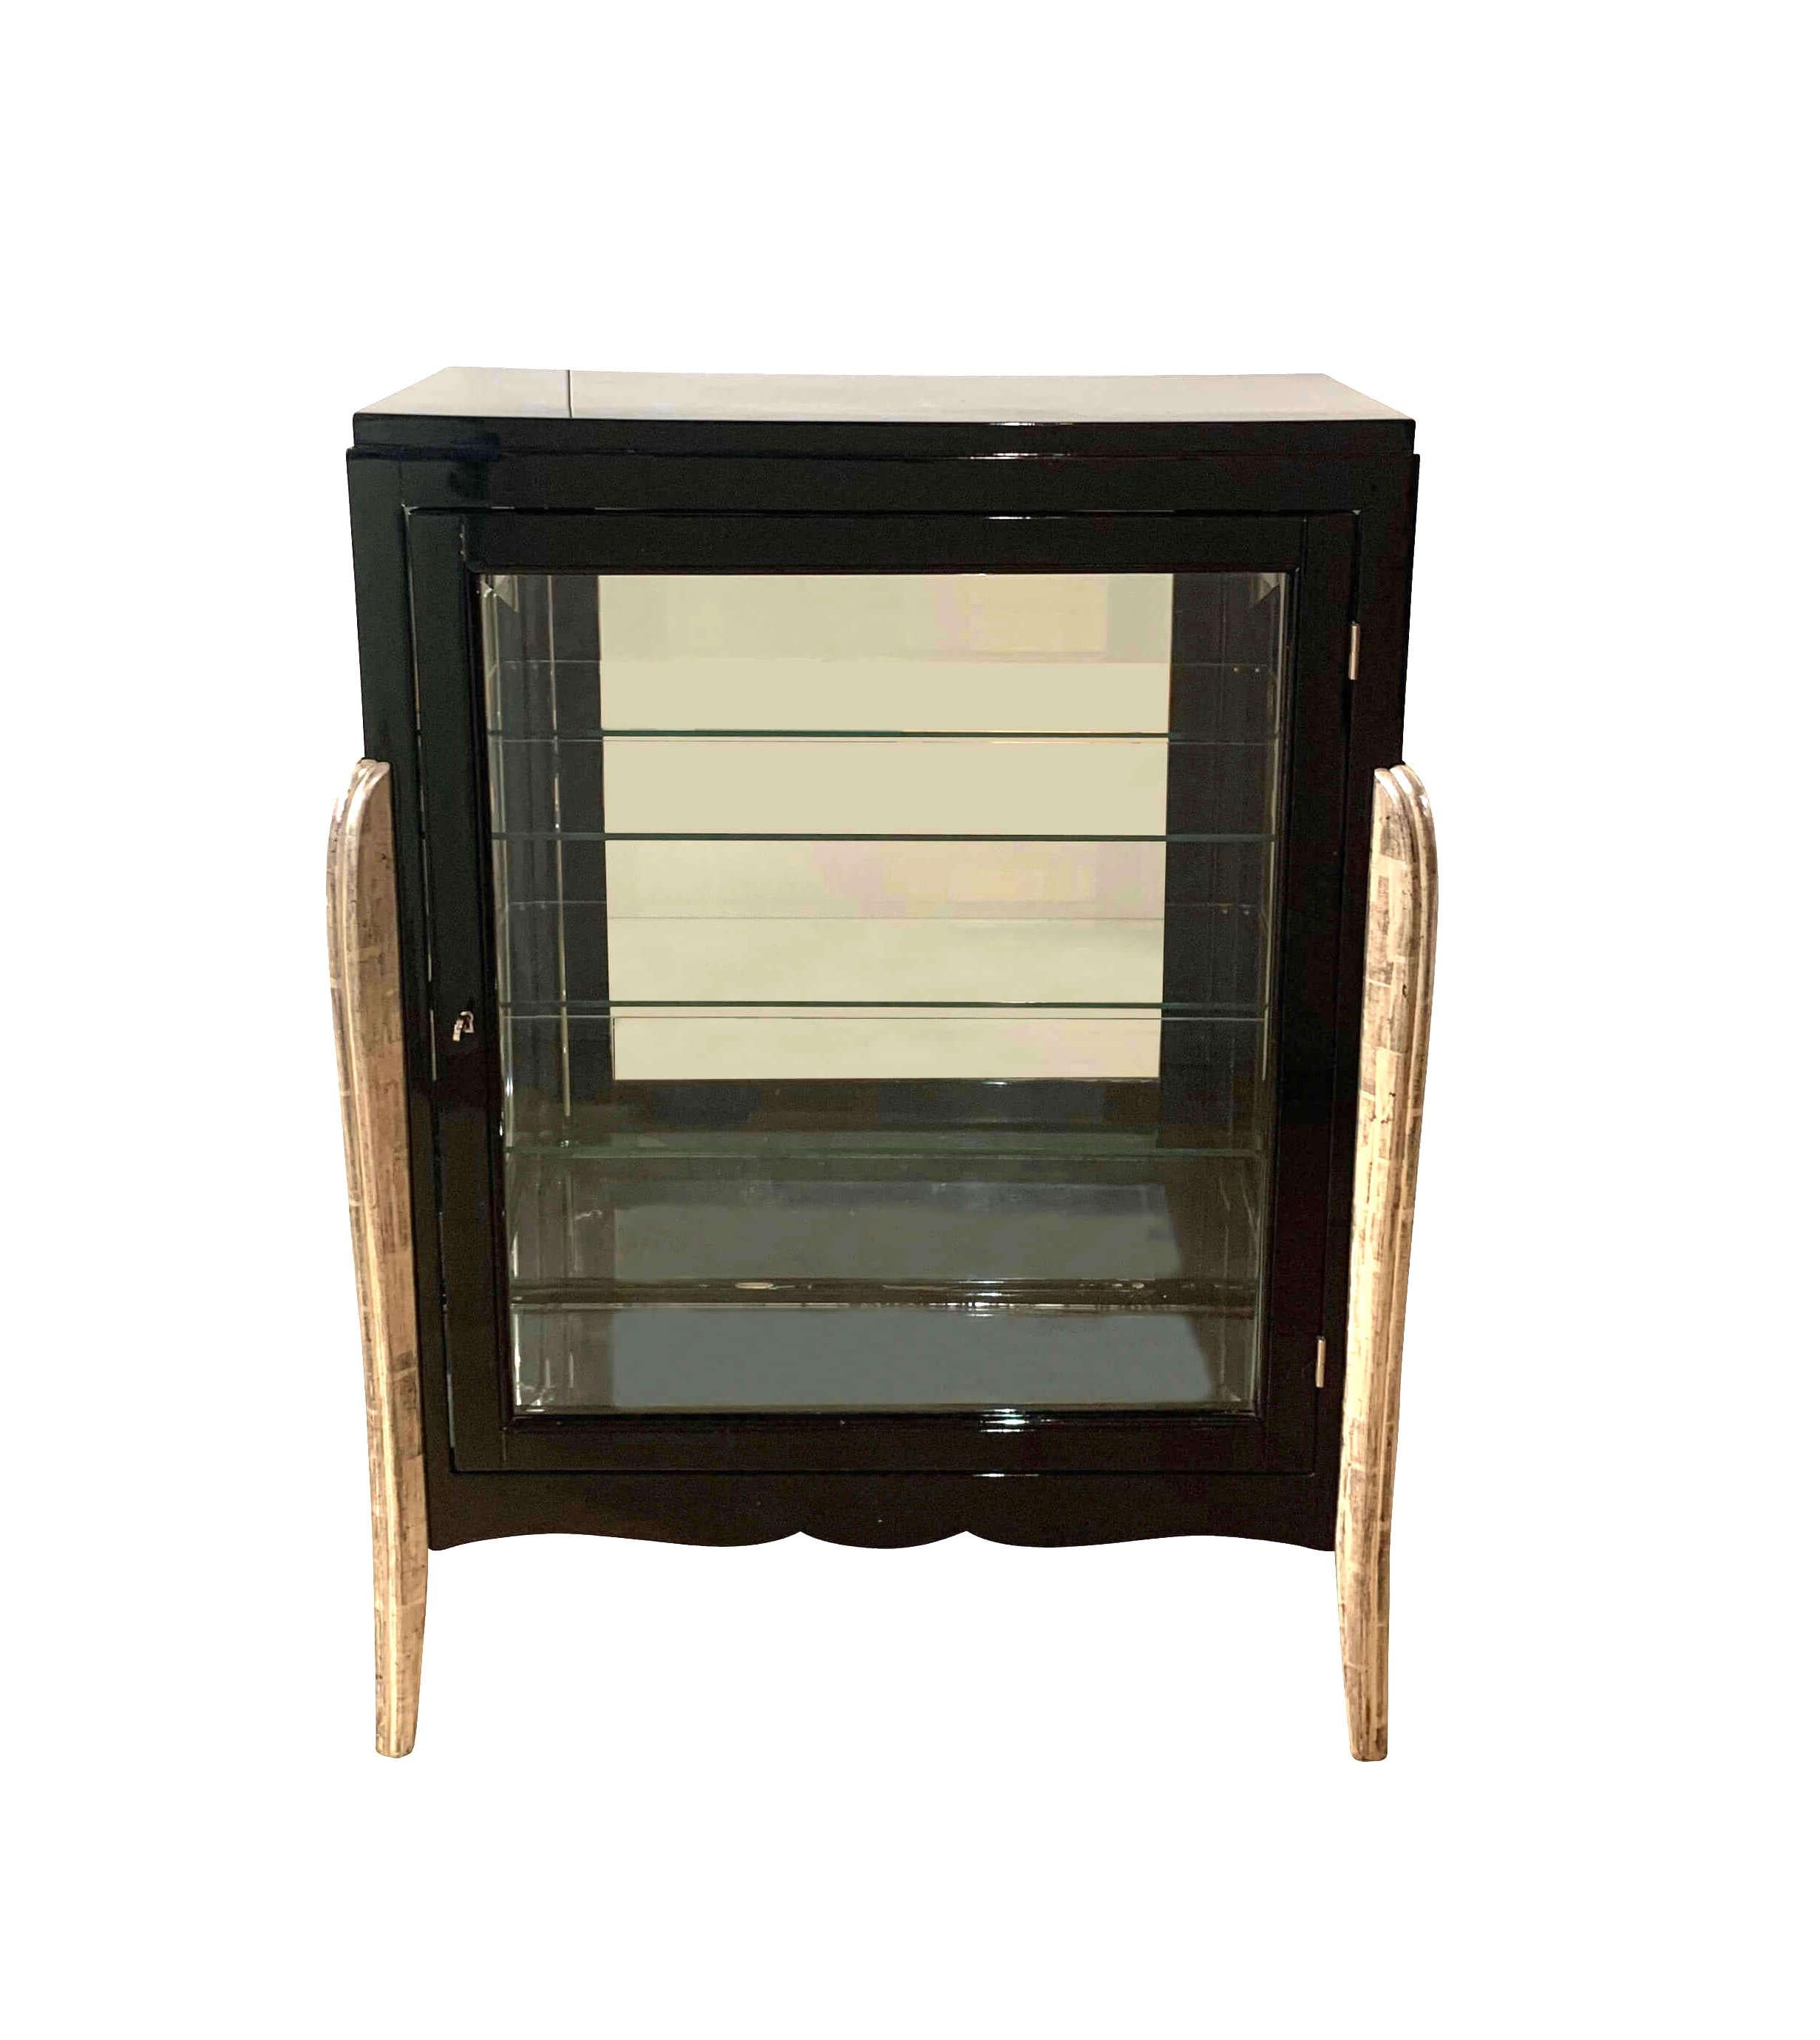 Small, elegant, restored Art Deco Showcase / Vitrine from France about 1930.

Black high-gloss piano lacquer on wood. Standing on four silver-colored, curved and fluted legs. Three sides glass with two glass shelves. 
At the bottom and back with